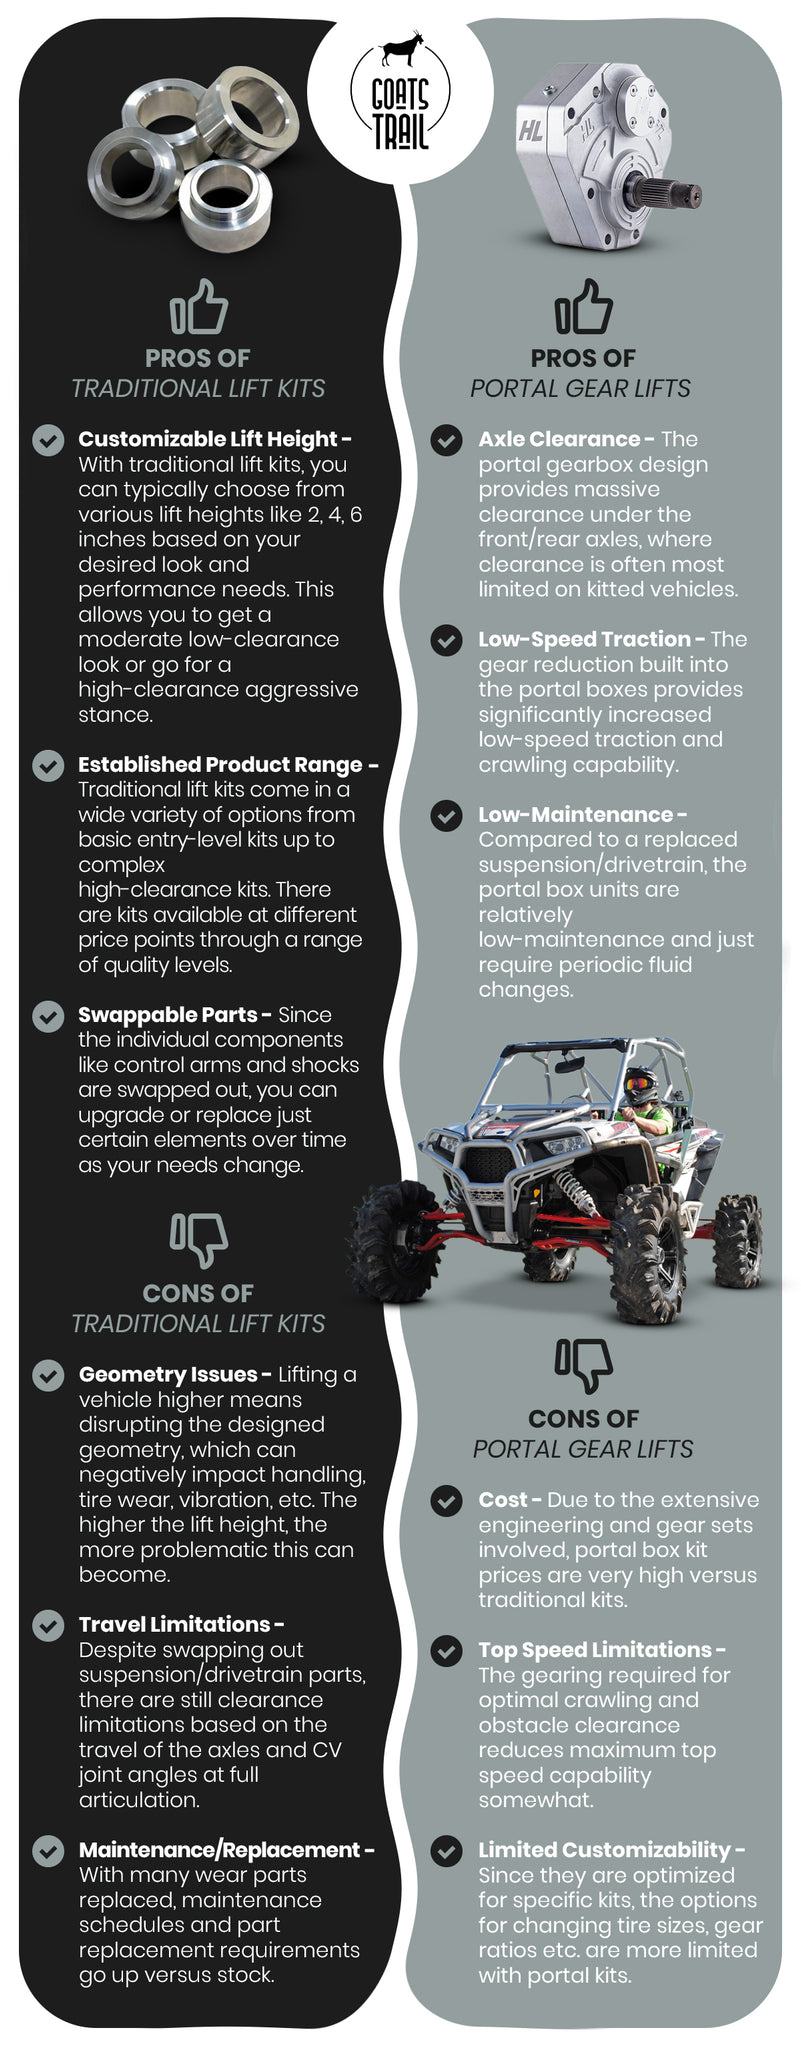 Portal versus traditional lift kits pros and cons